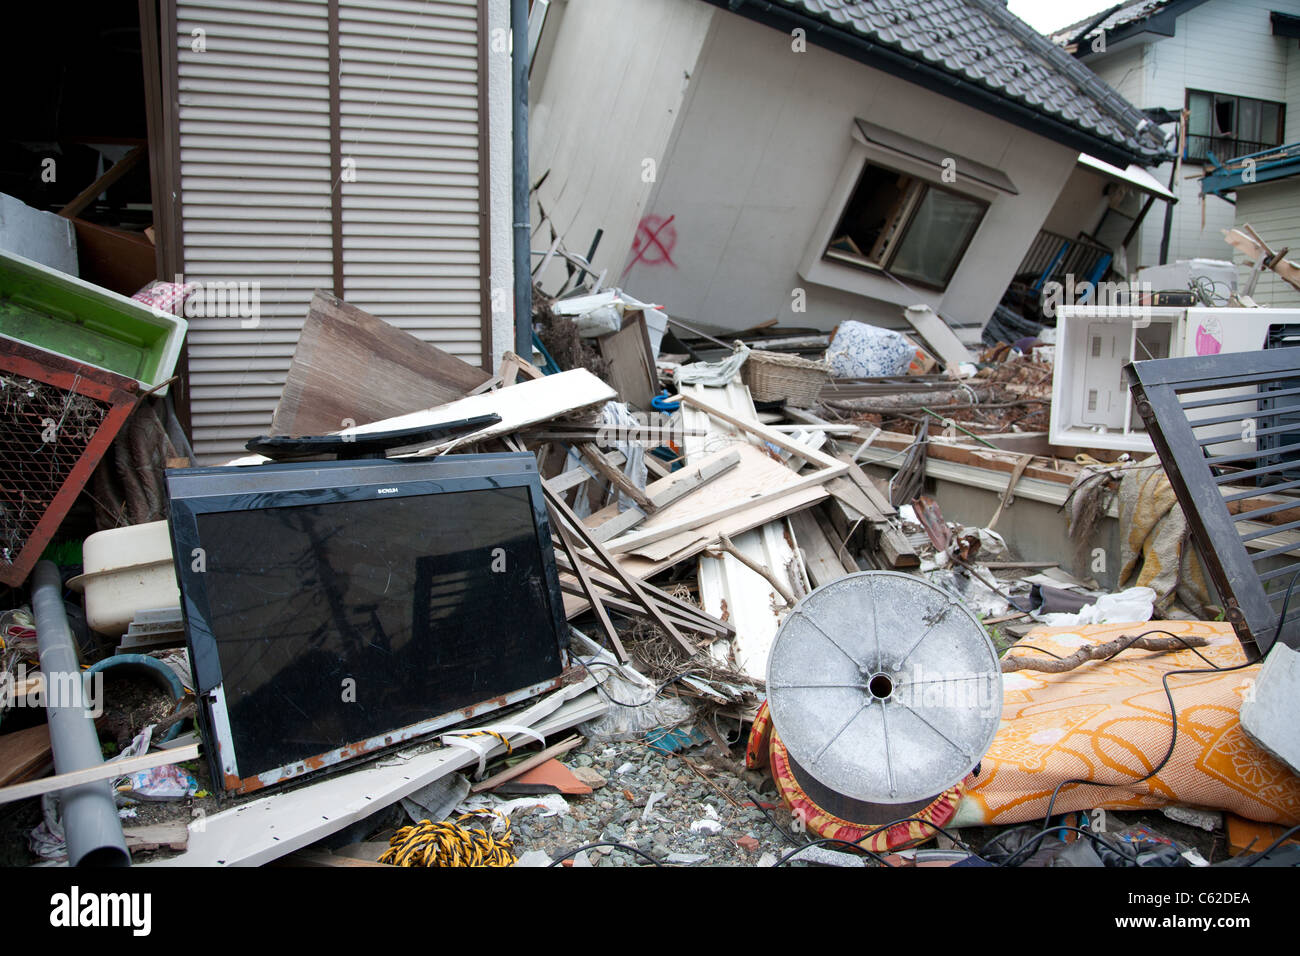 A large flat panel TV sits wrecked in front of homes toppled by the tsunami in Kamaishi, Japan, June 2011 Stock Photo